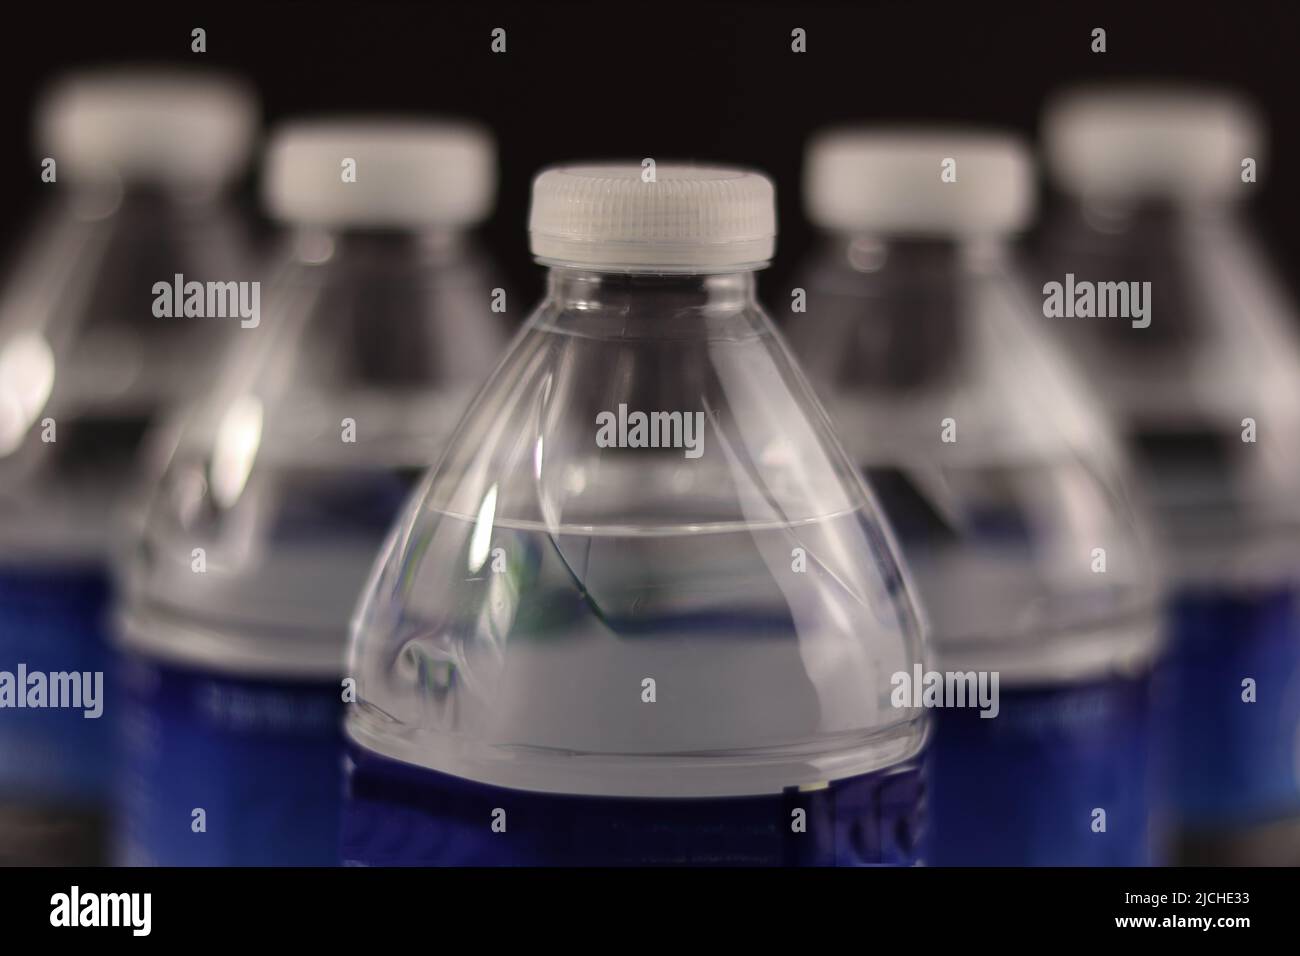 https://c8.alamy.com/comp/2JCHE33/small-water-bottles-placed-in-perspective-view-and-on-a-black-background-2JCHE33.jpg